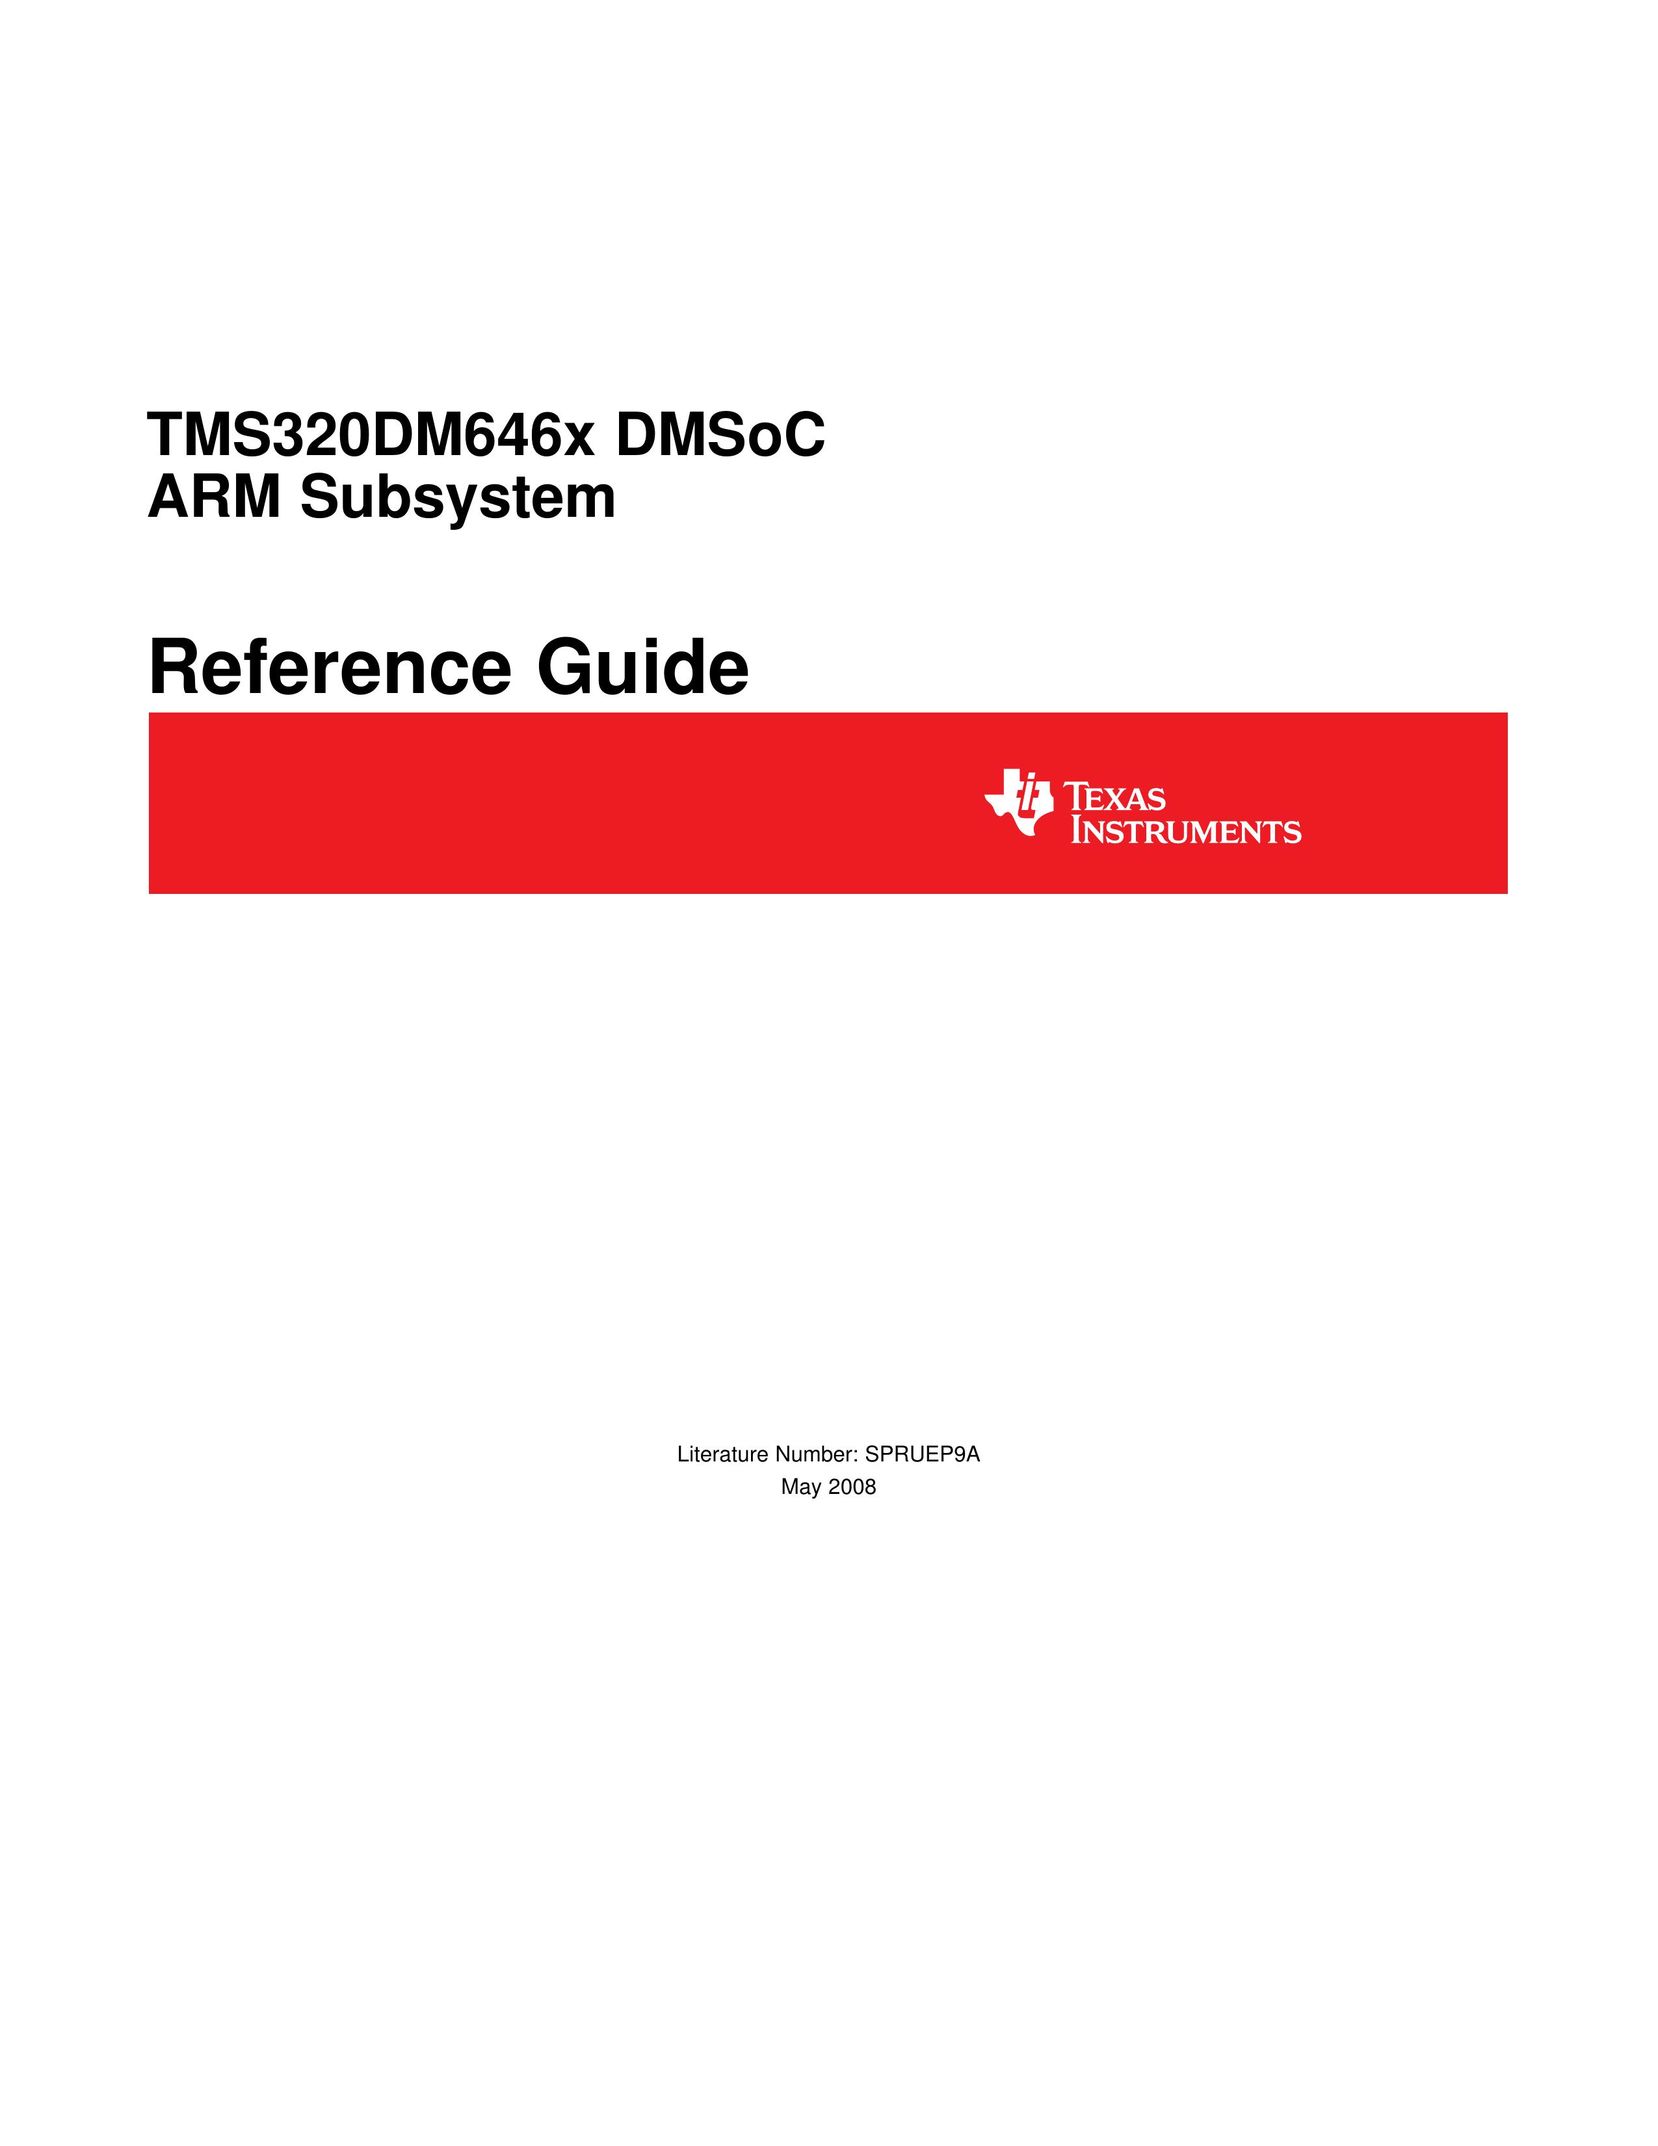 Texas Instruments TMS320DM646x Computer Hardware User Manual